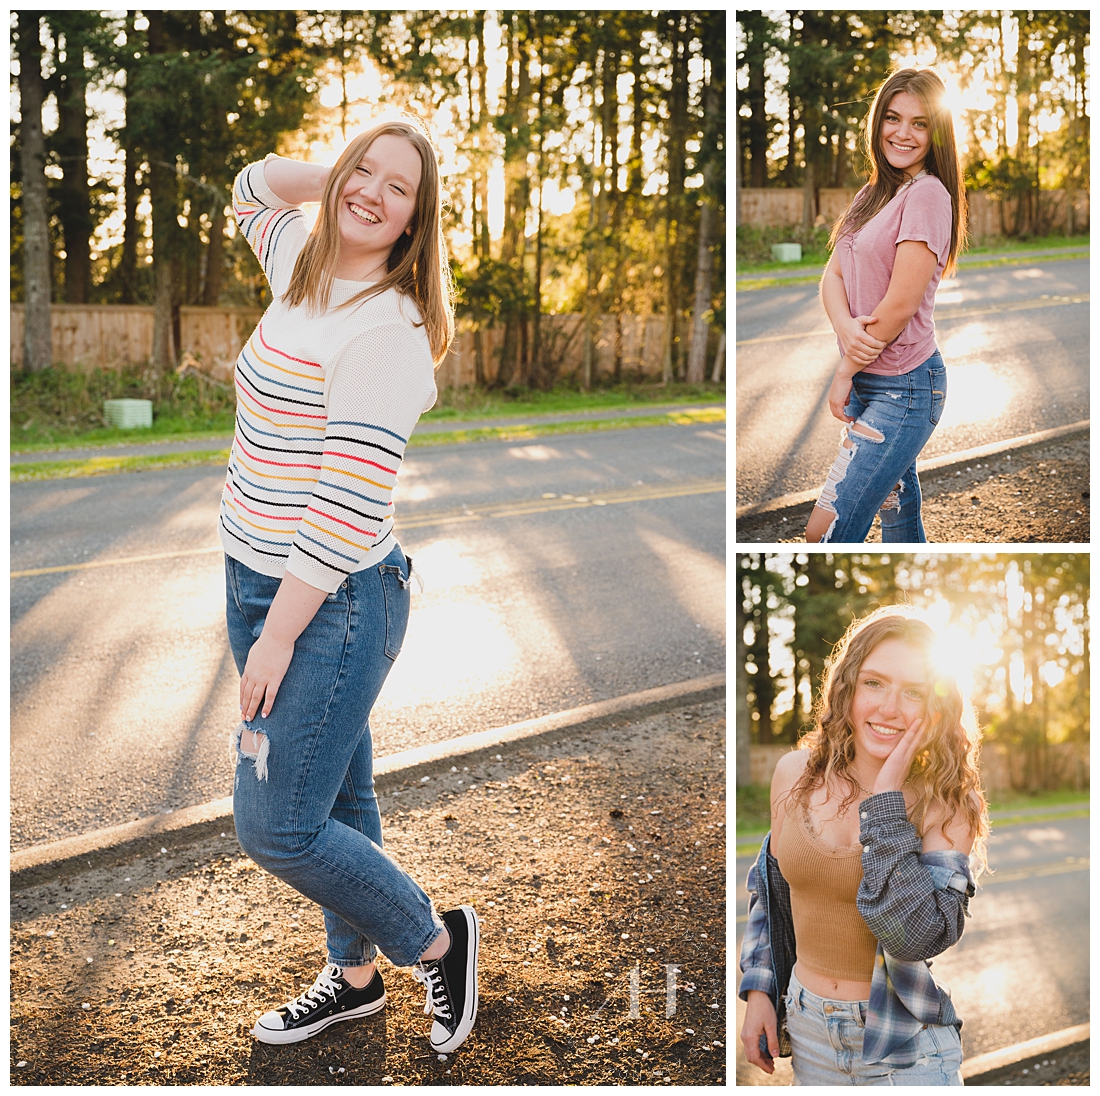 AHP Model Team Individual Portraits | Golden Hour Senior Portraits, Pose Ideas for Spring Portraits, Outfit Inspiration | Photographed by Amanda Howse Photography | Tacoma Senior Portraits 